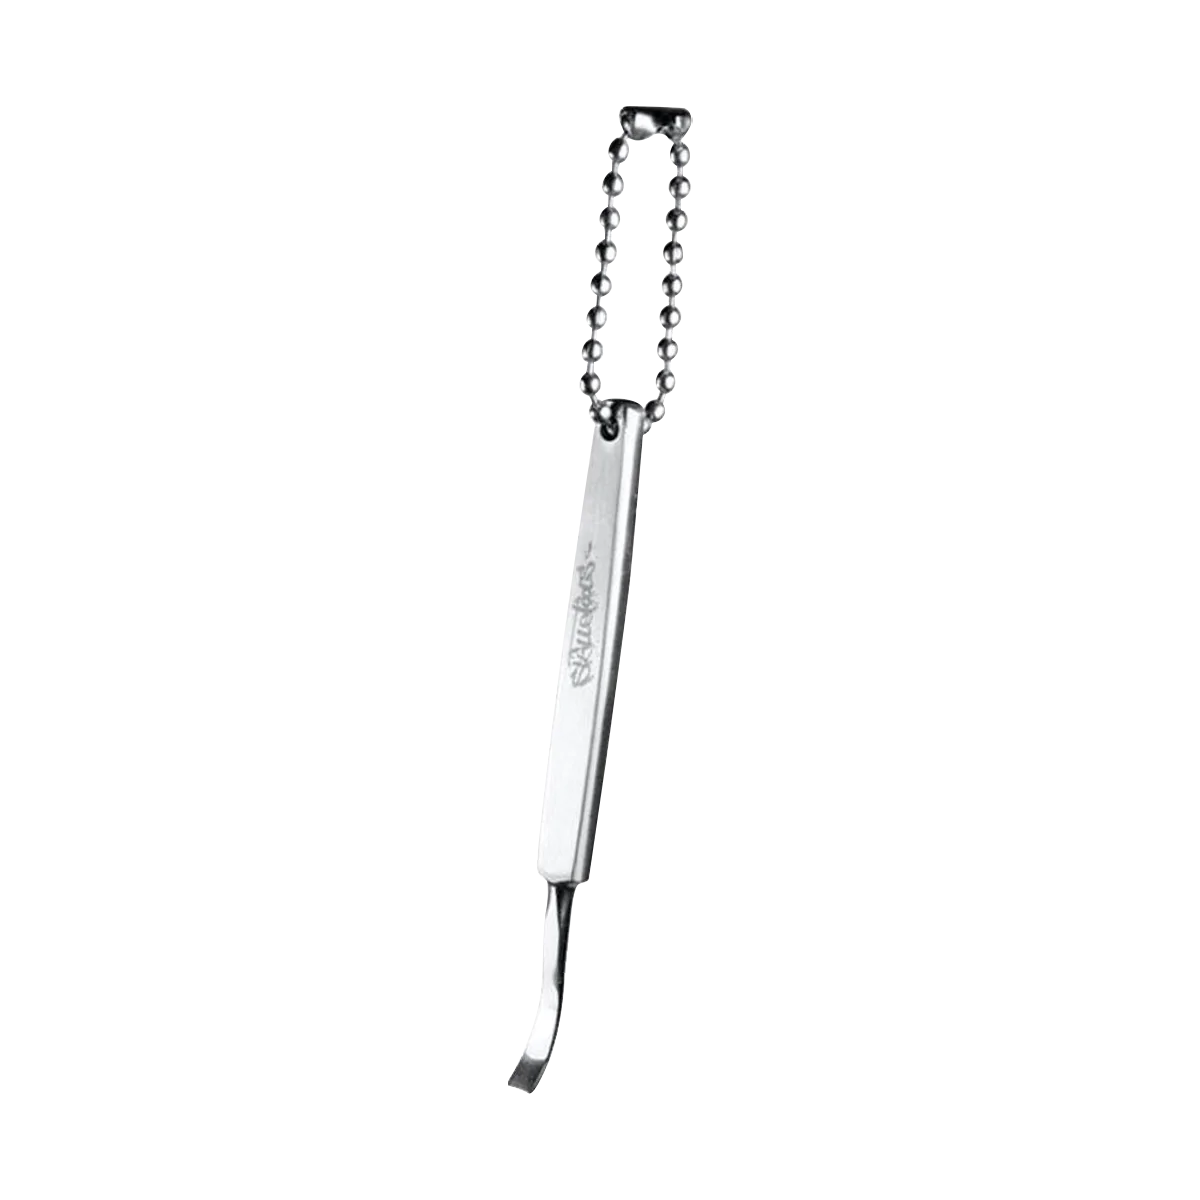 Skilletools Classic MINI Dab Tool in silver with keychain, 3" size for dab rigs - side view